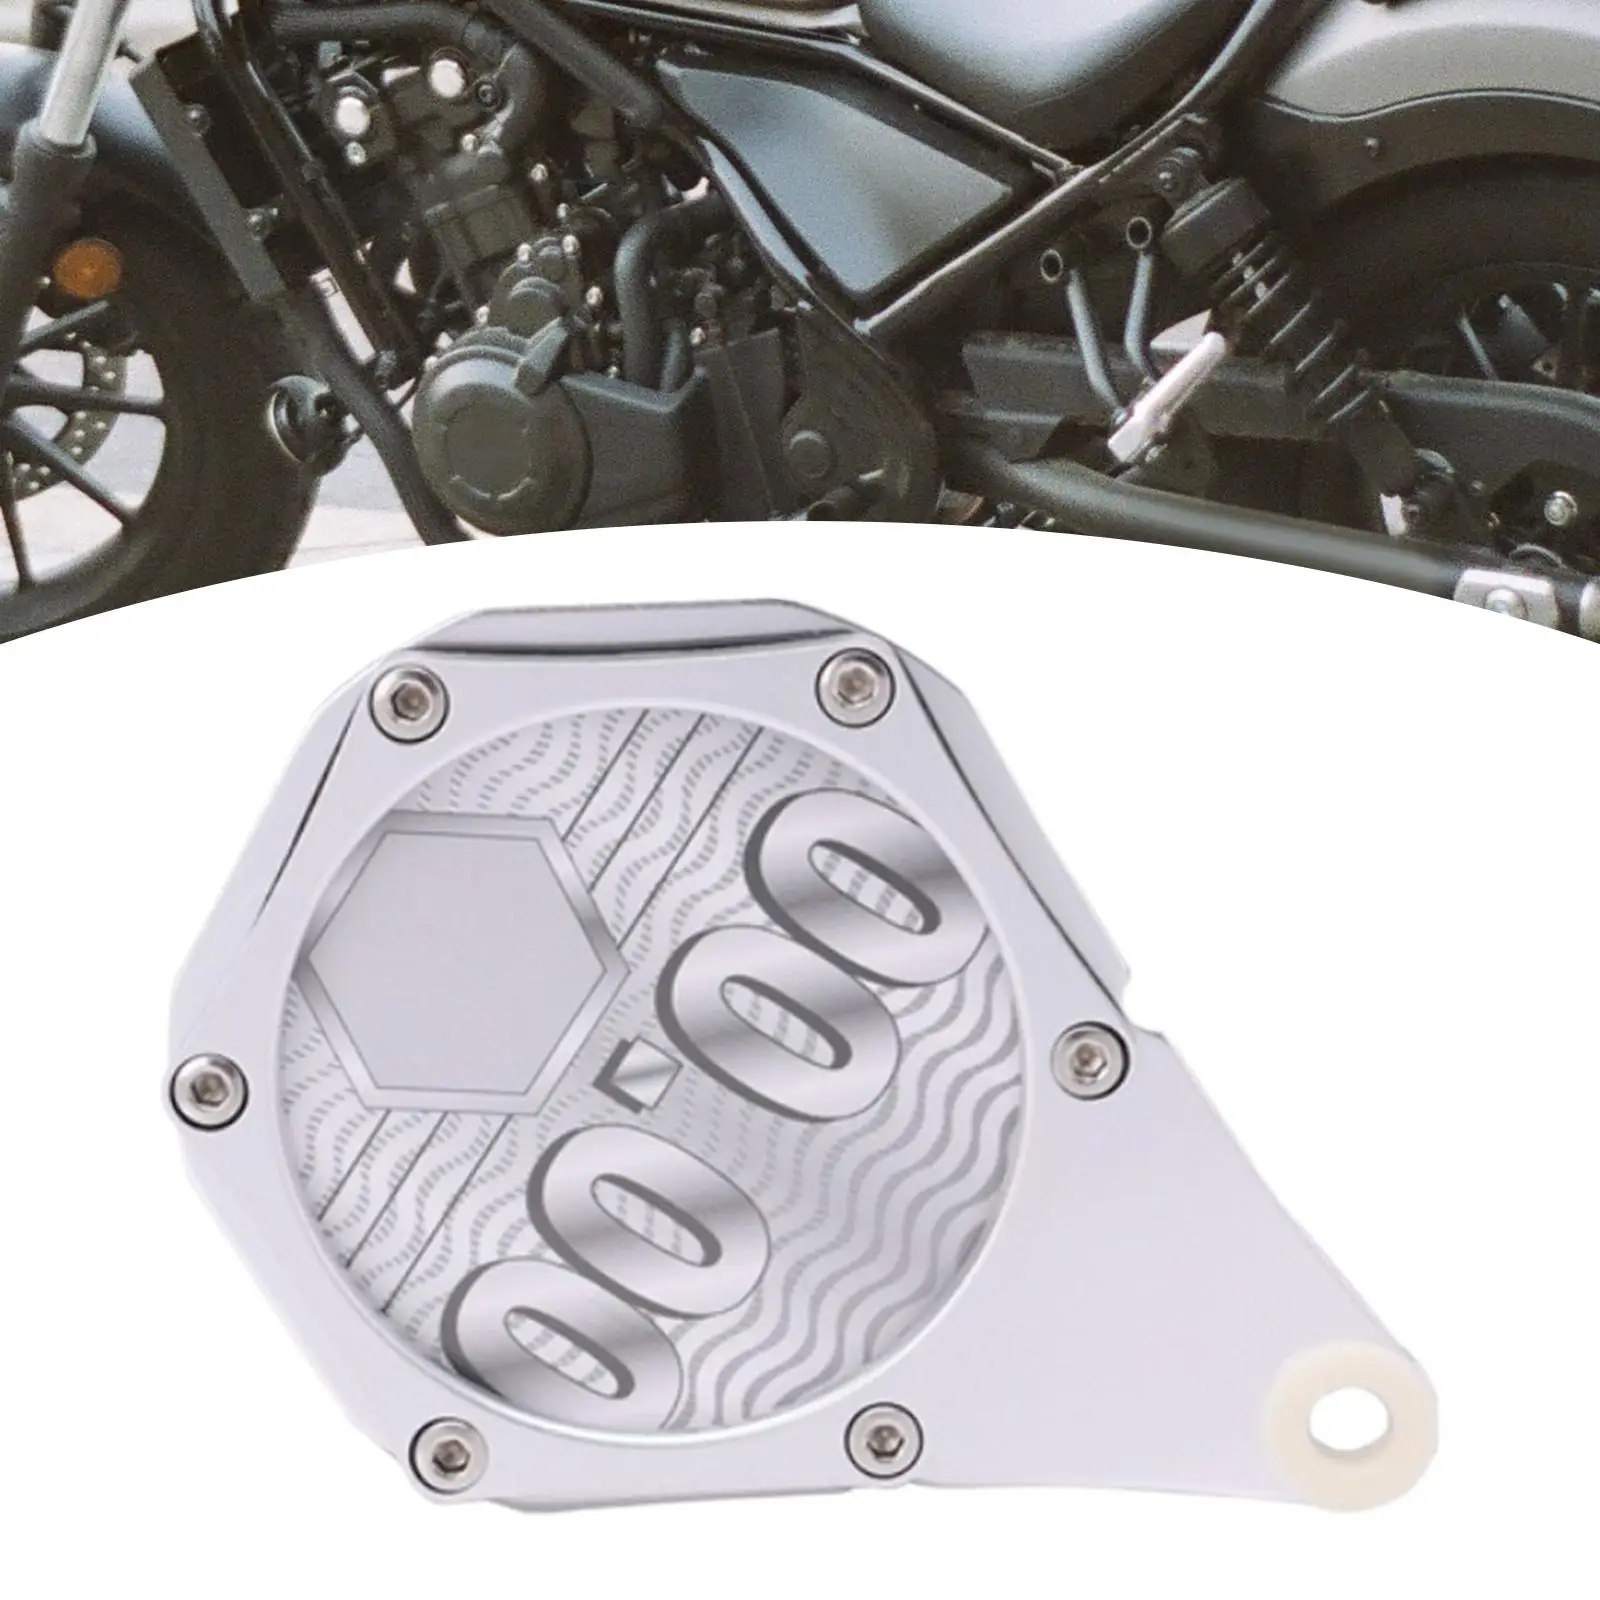 Tax Disc Plate Compact Motorbike Tax Disc Holder for Scooter Motorcycle Durable